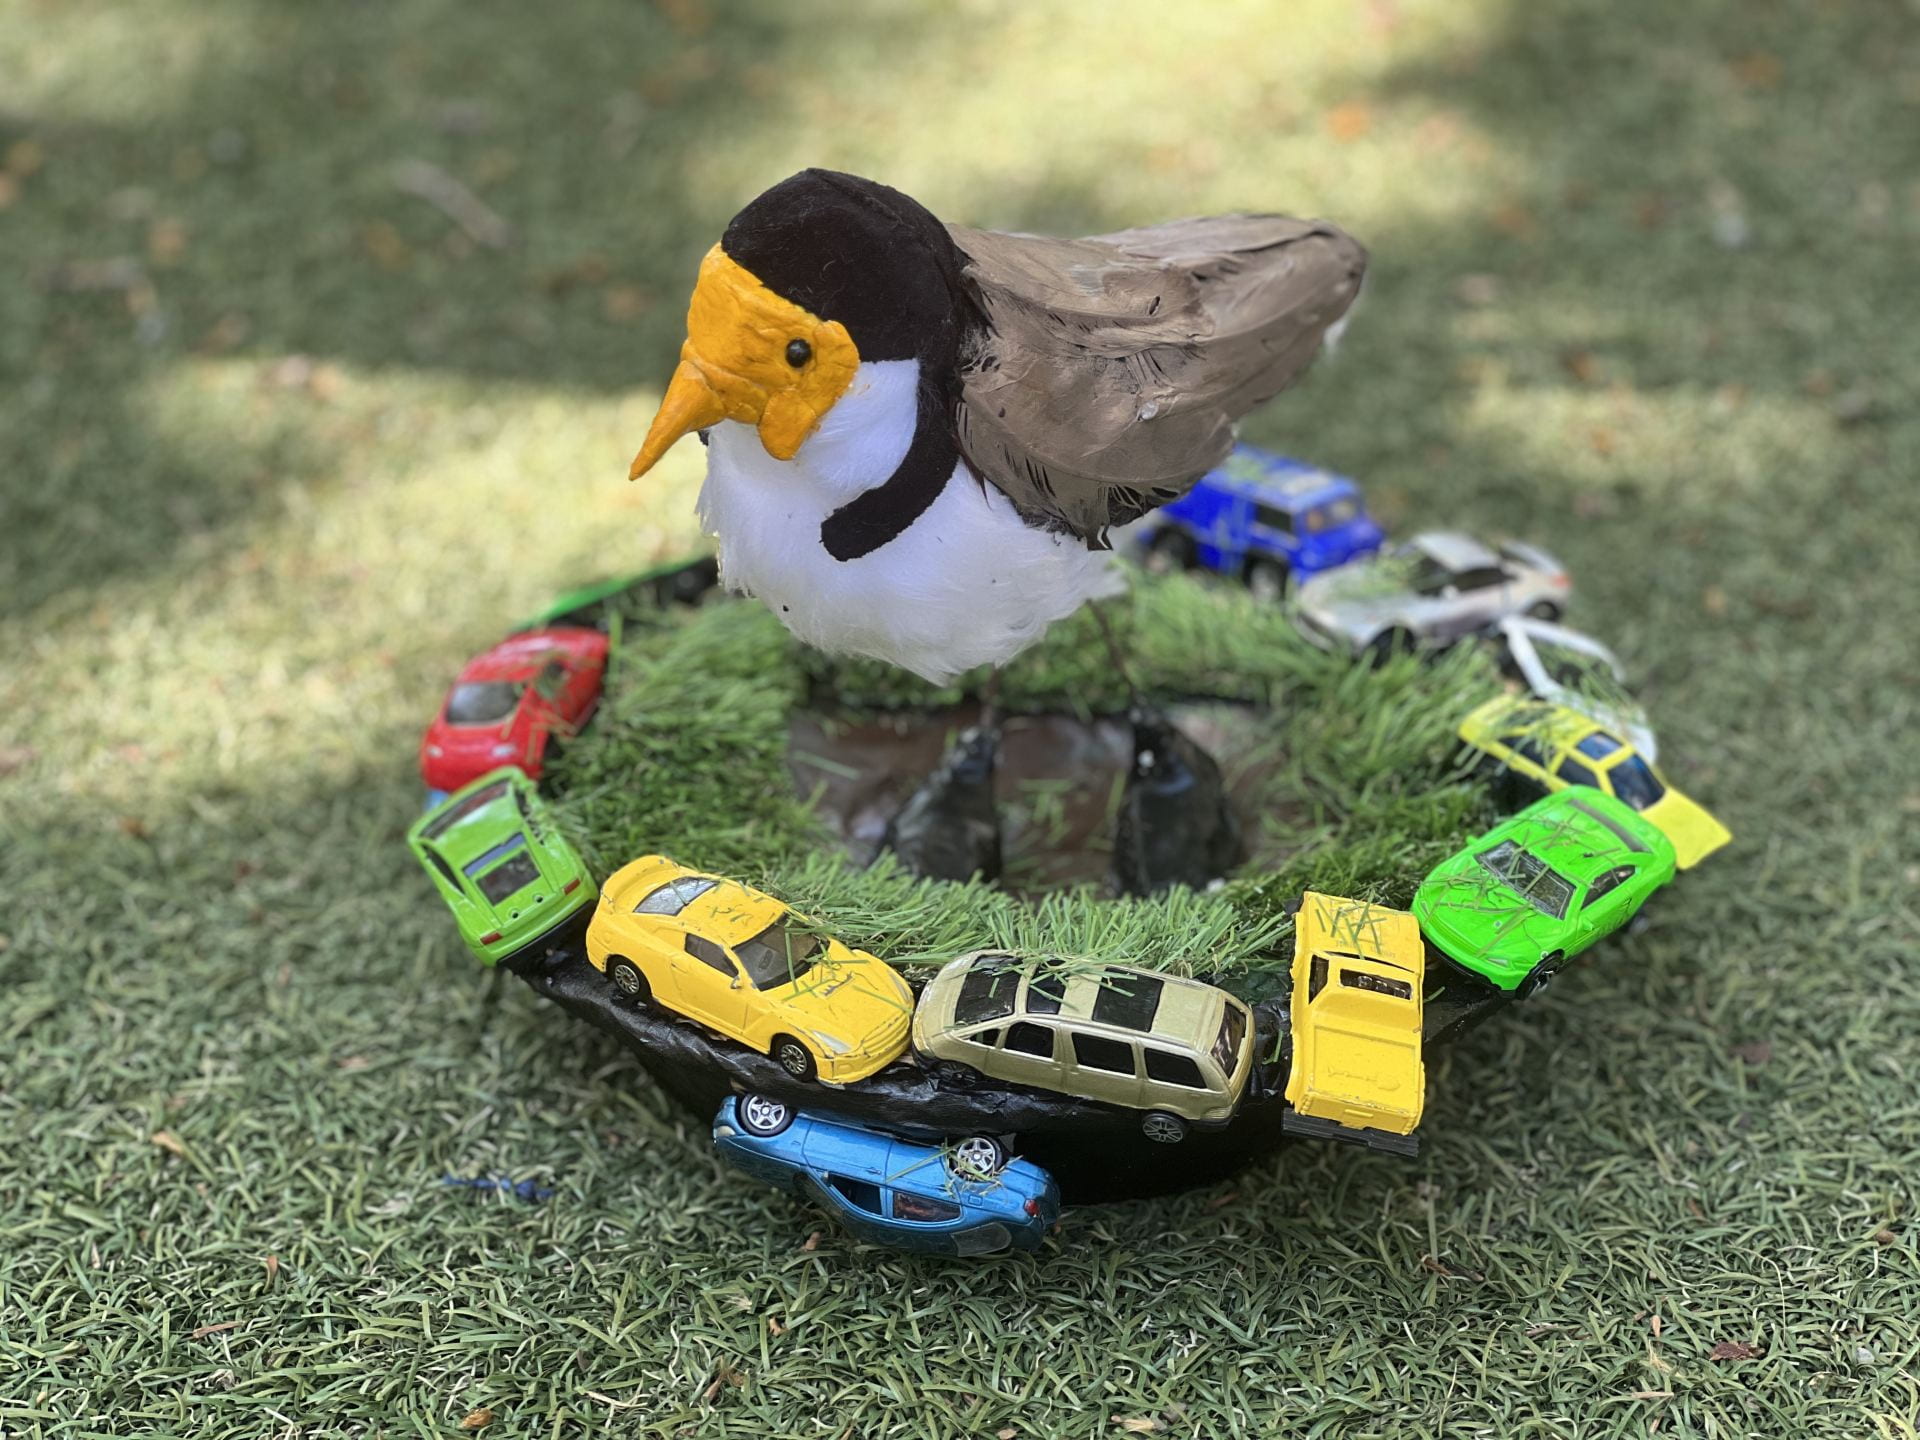 sculpture of a plover on a green base with cars around it